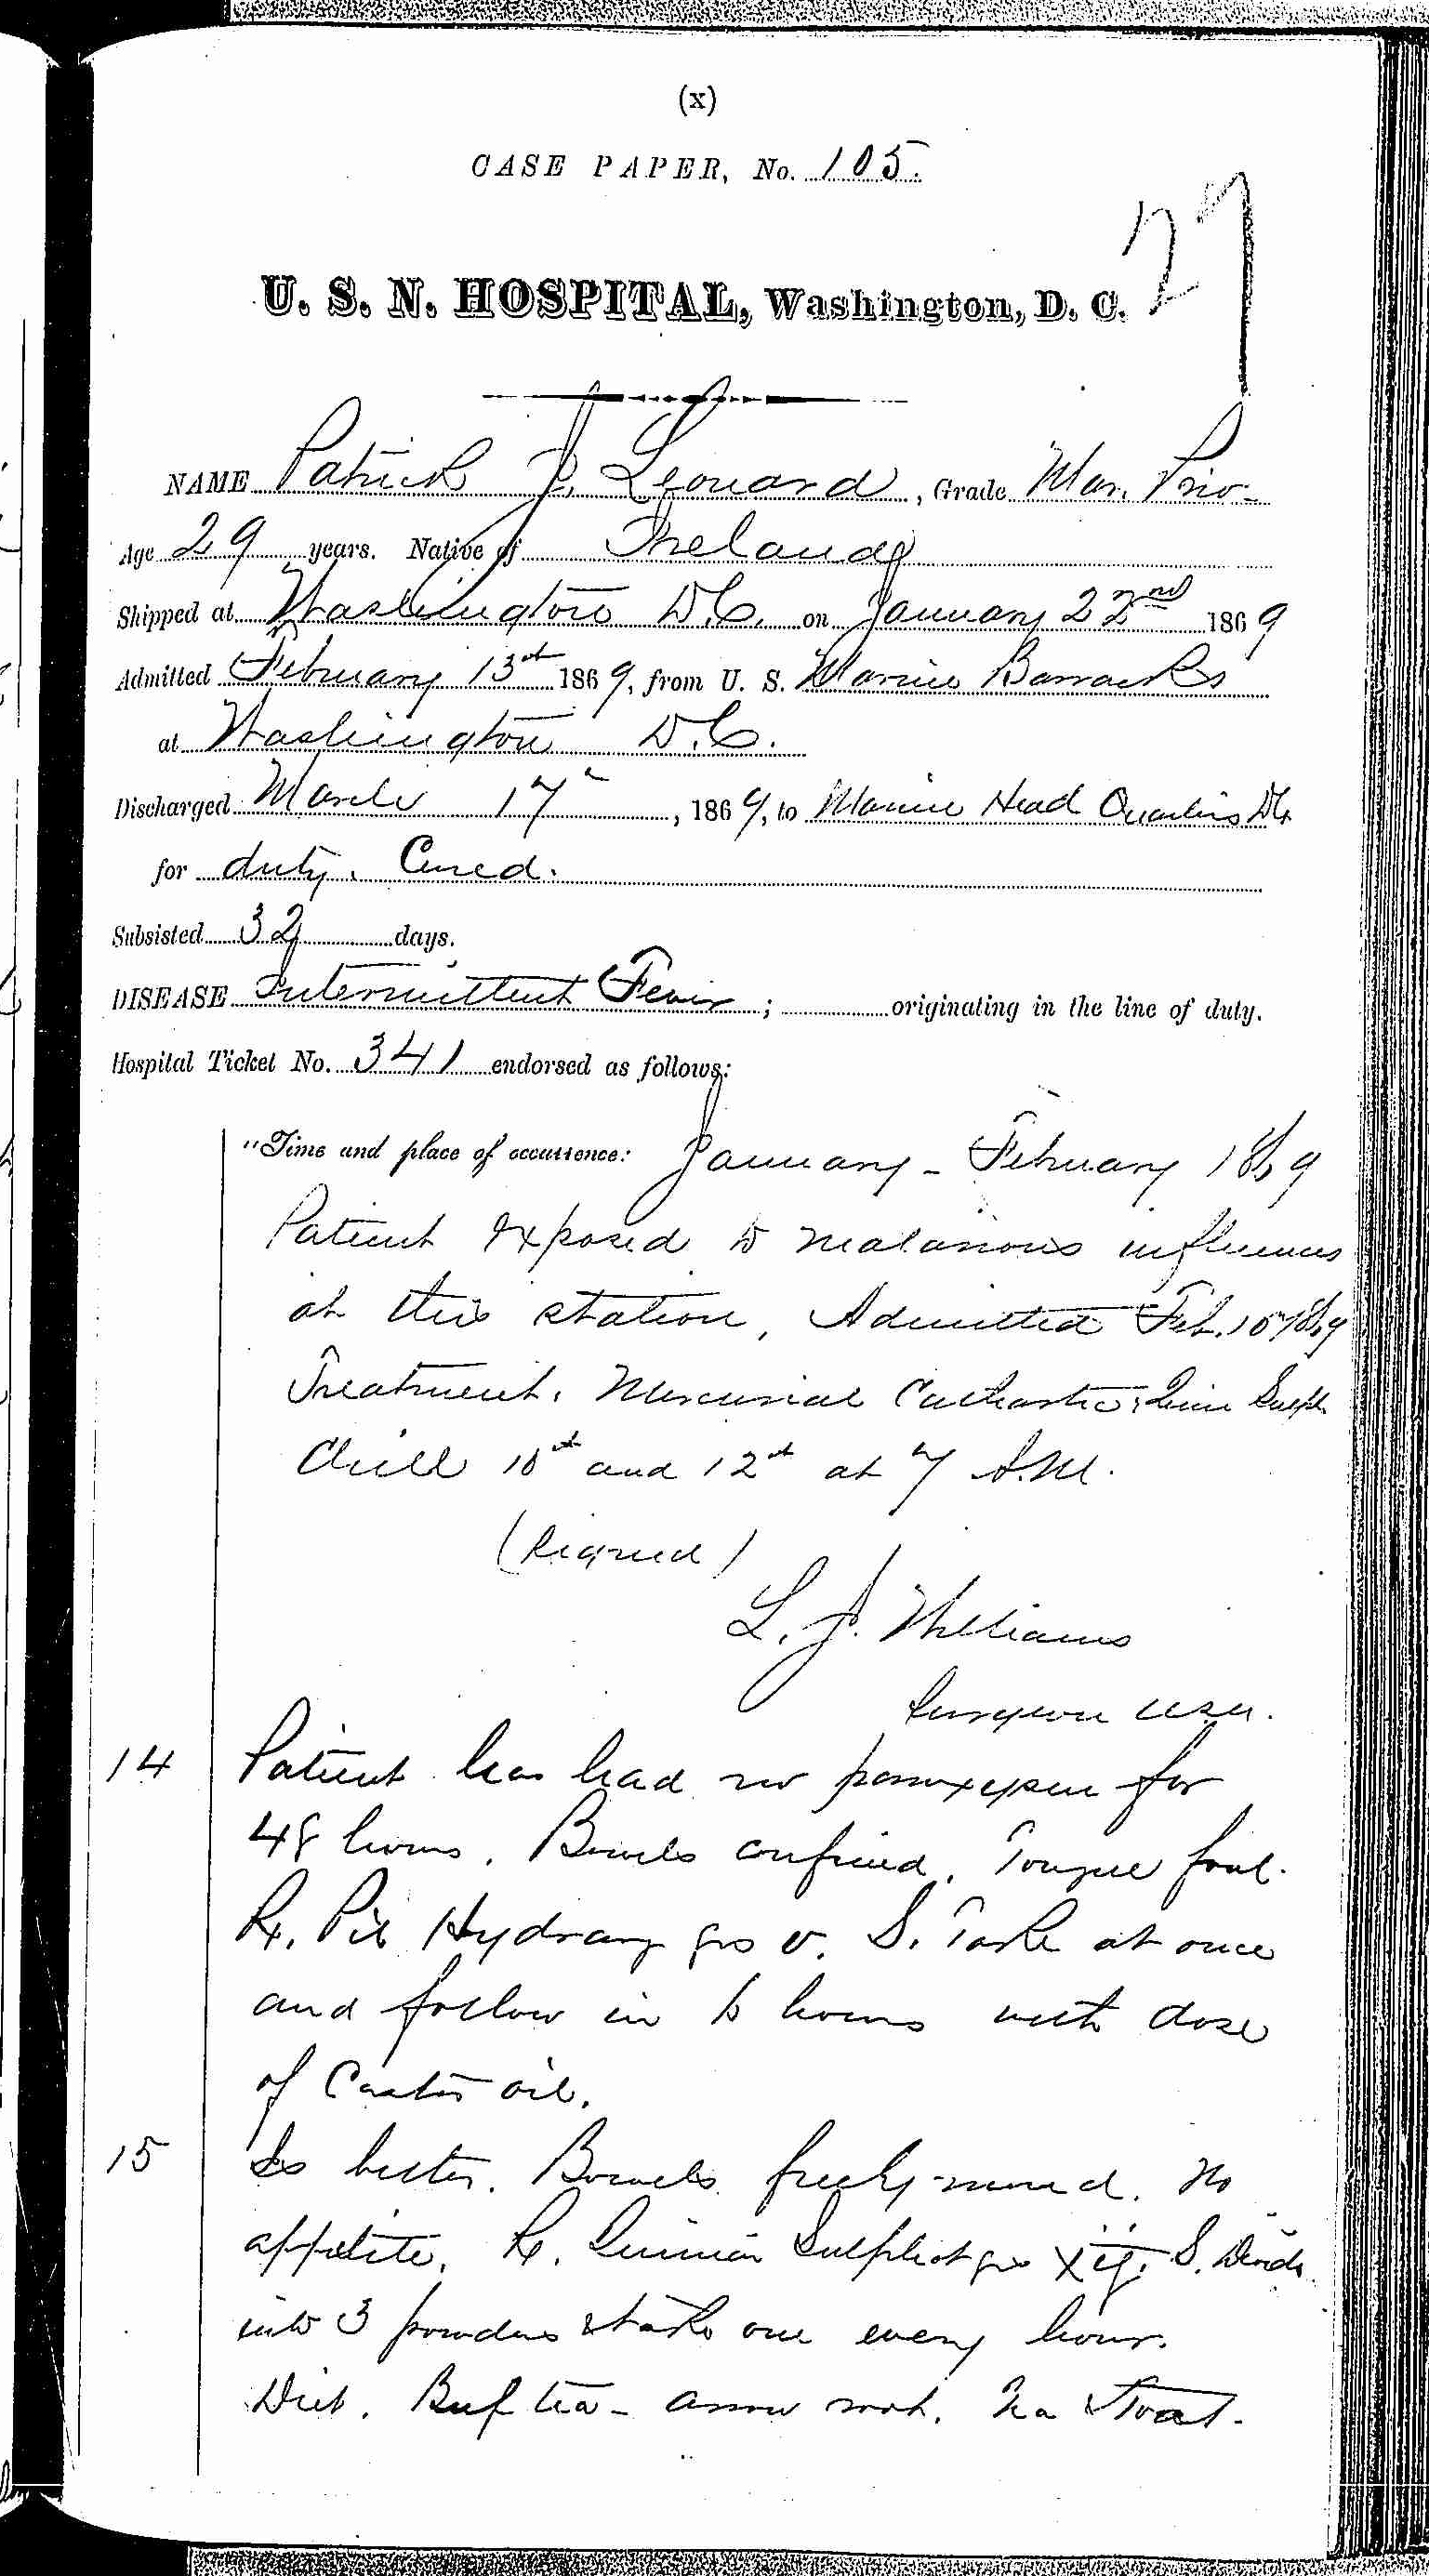 Entry for Patrick J. Leonard (page 1 of 3) in the log Hospital Tickets and Case Papers - Naval Hospital - Washington, D.C. - 1868-69